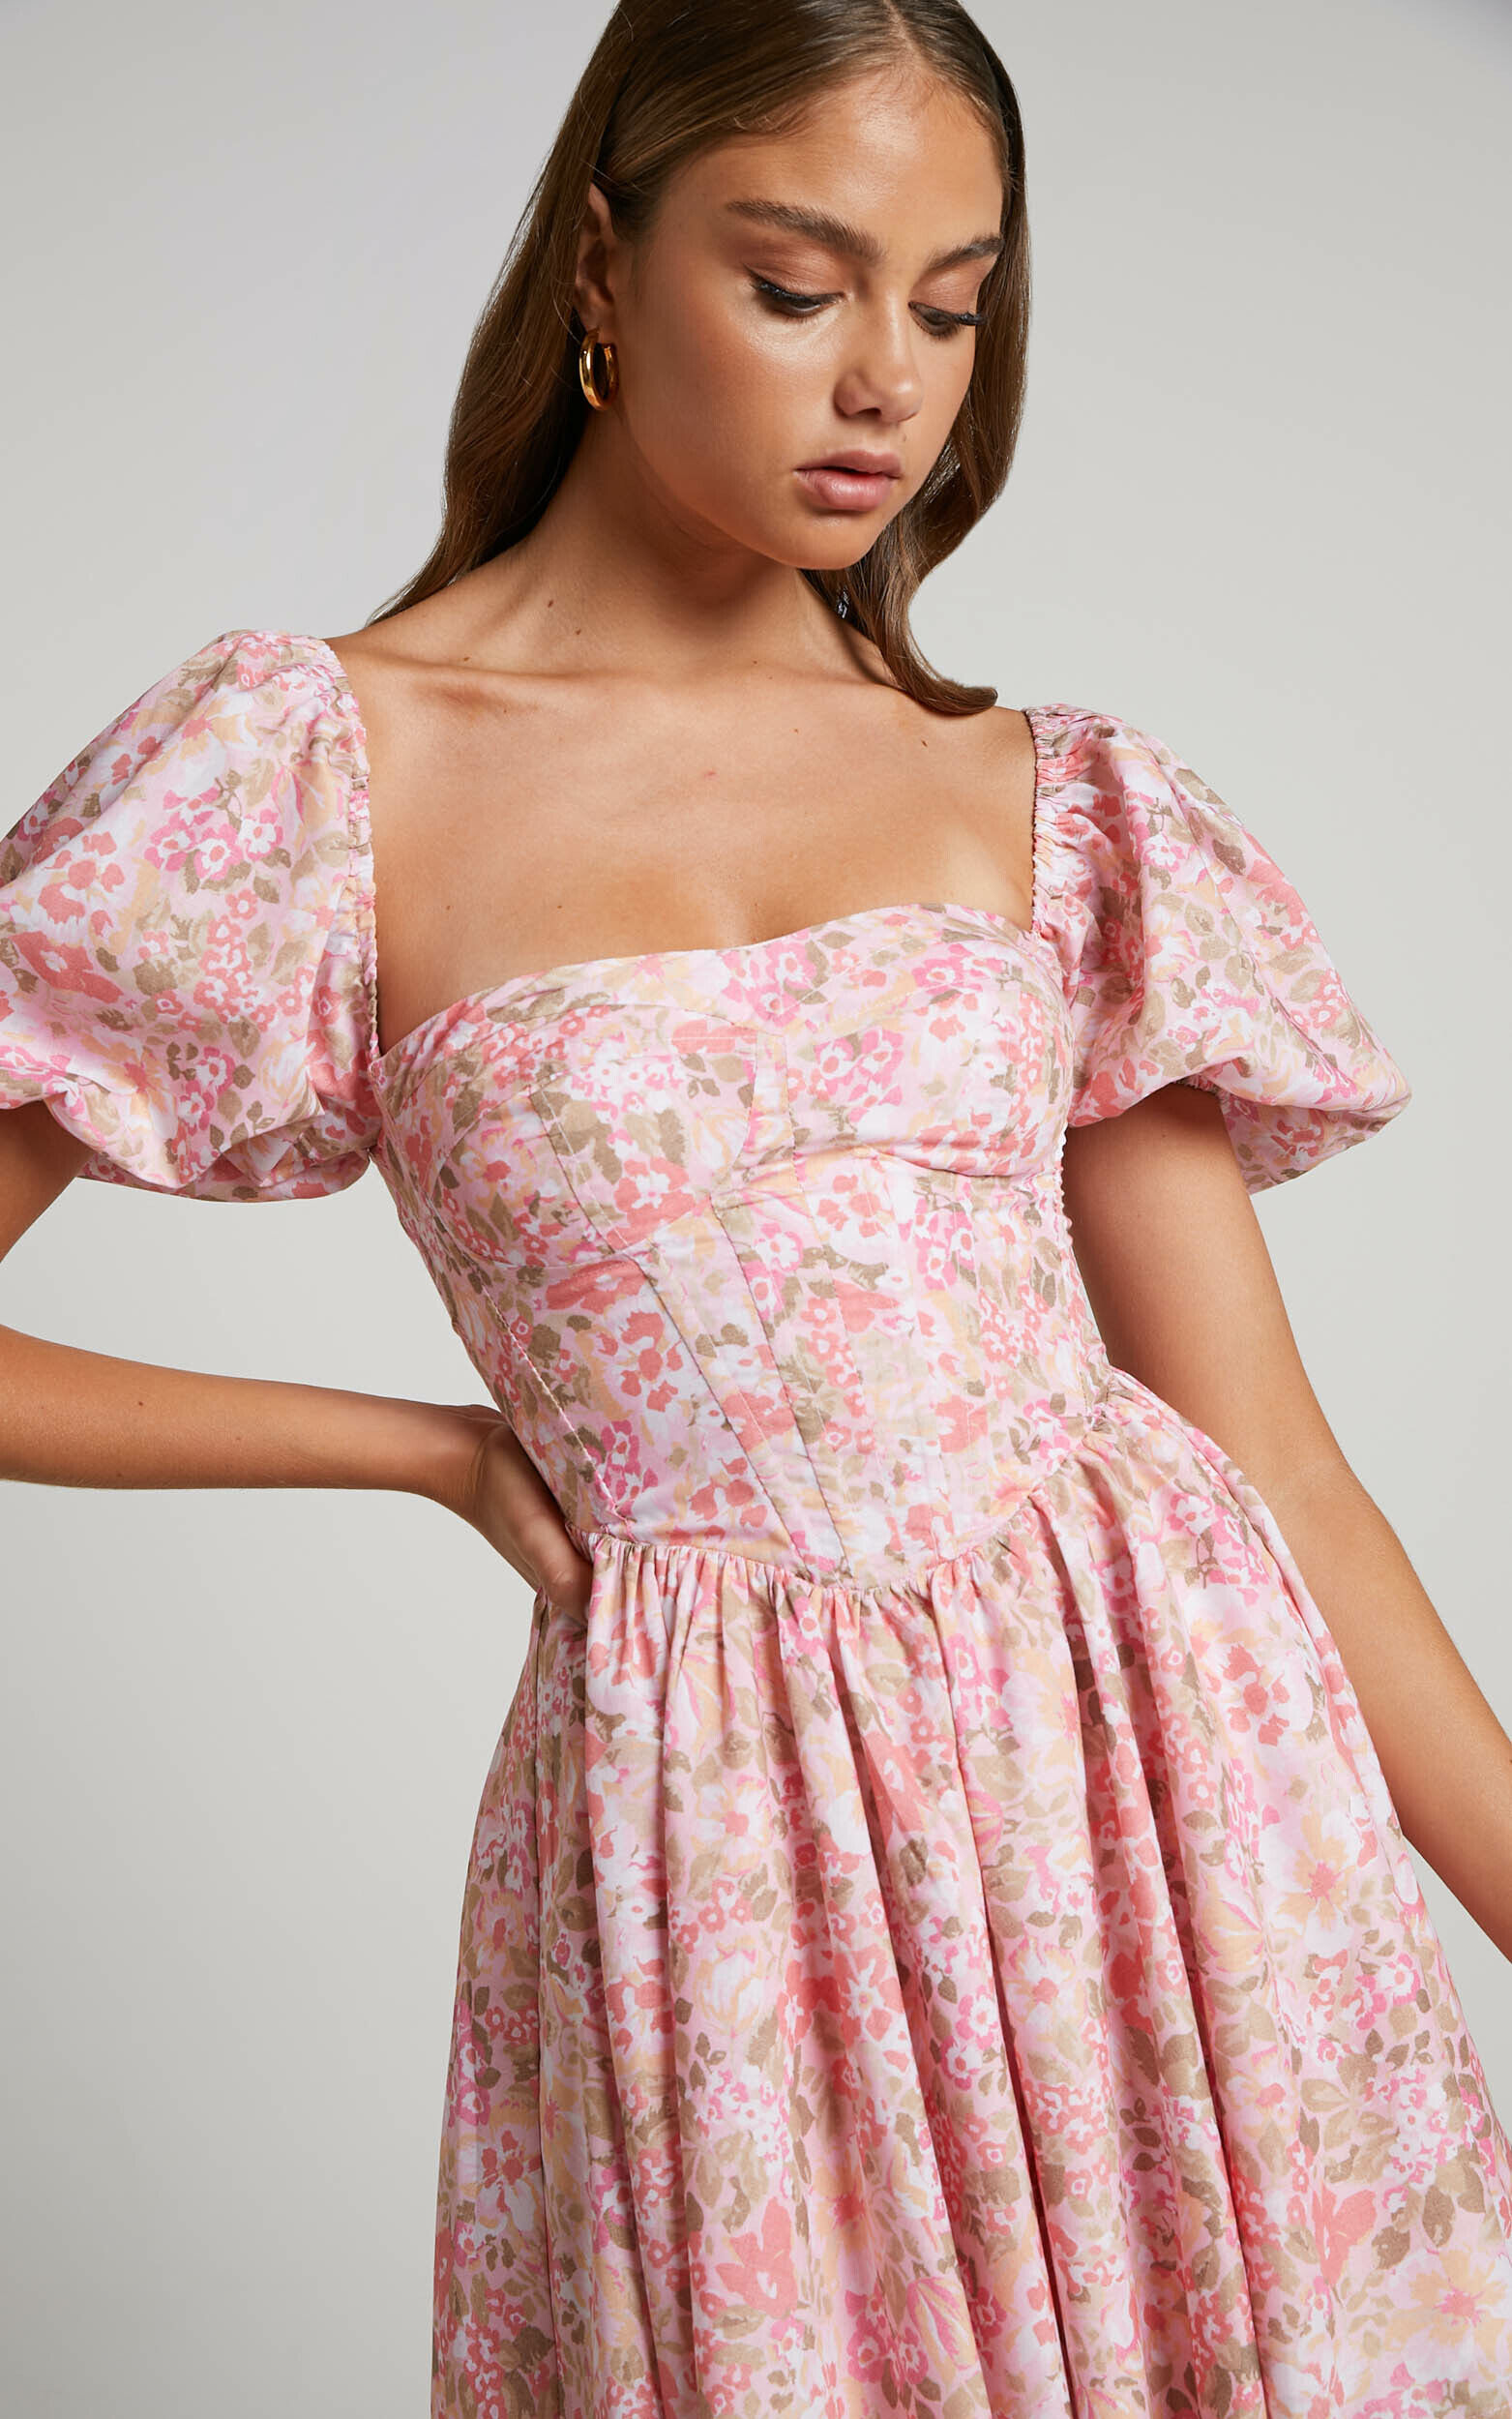 Phorchia Mini Dress - Fit and Flare Puff Sleeve Corset Dress in